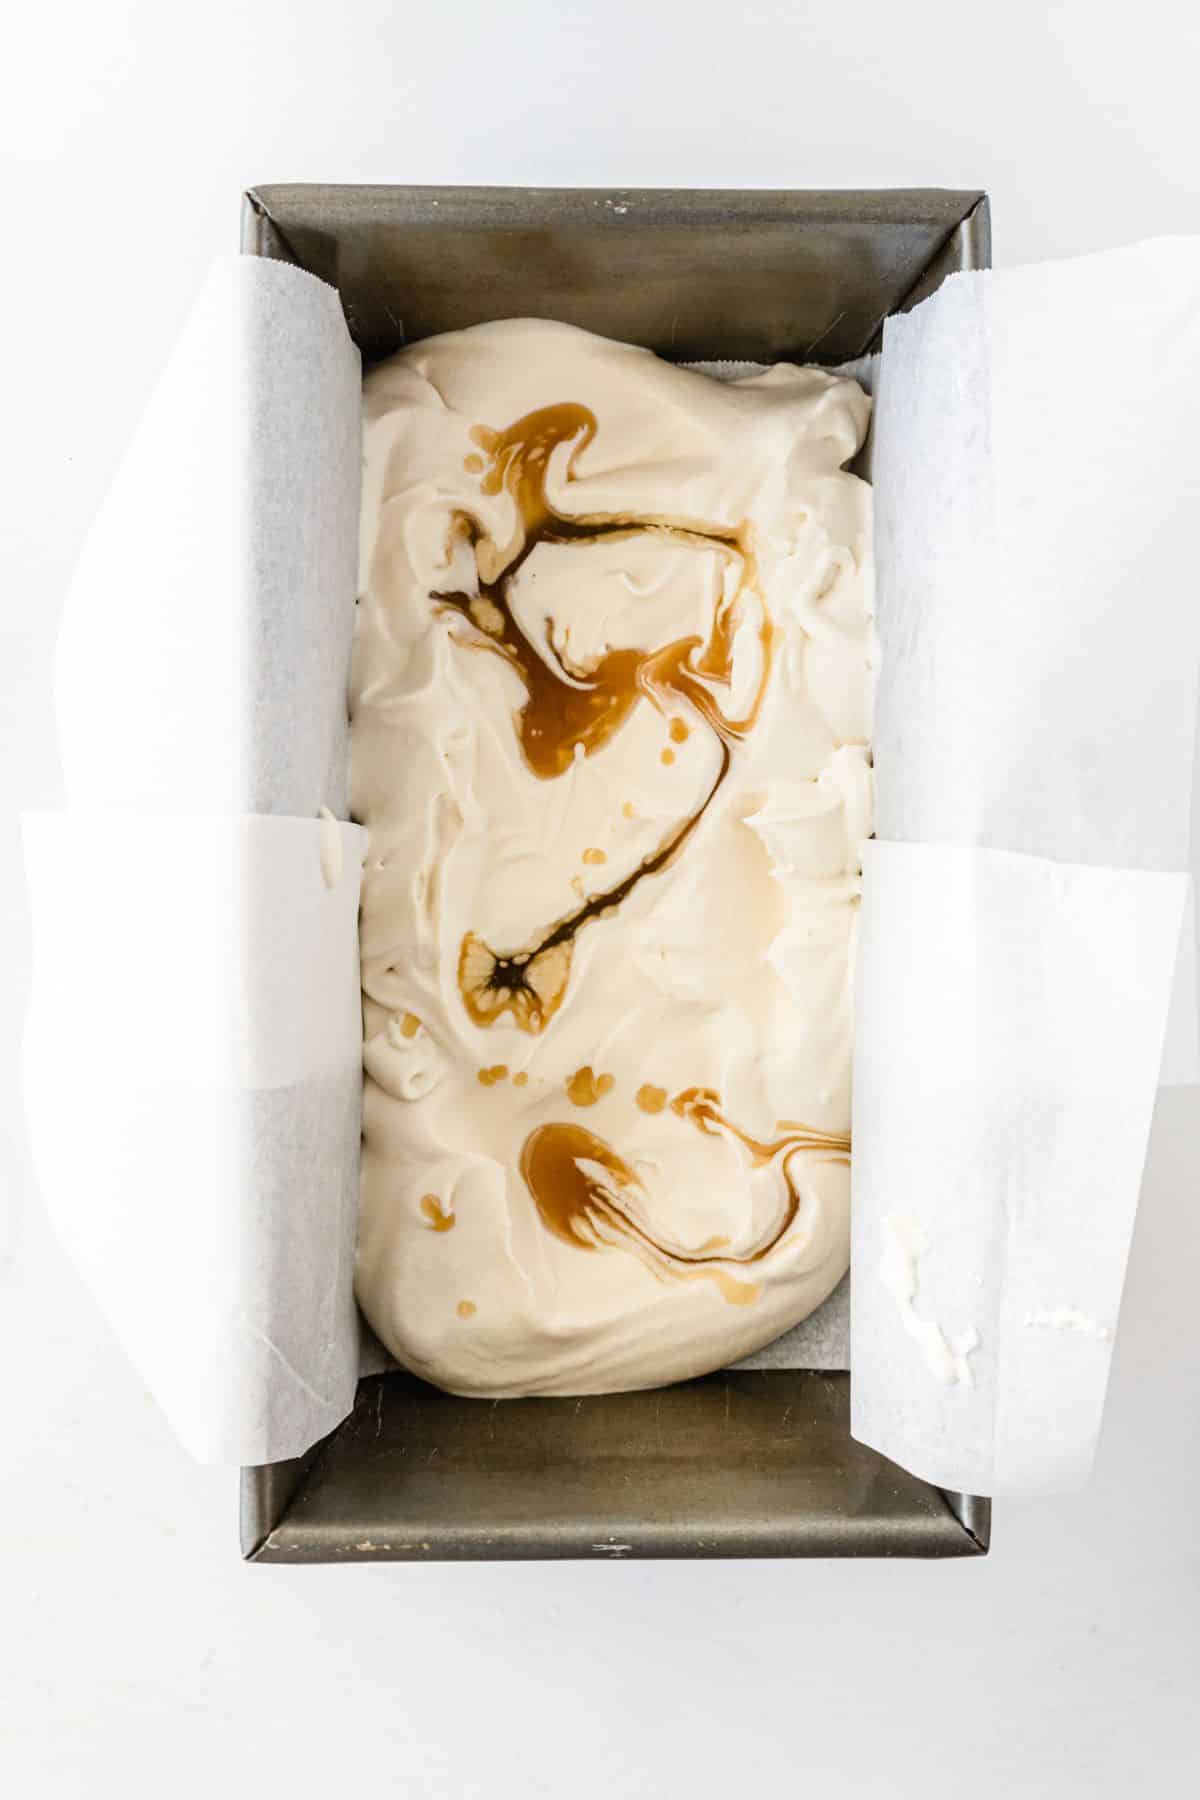 the cooled butterscotch sauce drizzled over the top of the ice cream mixture. 